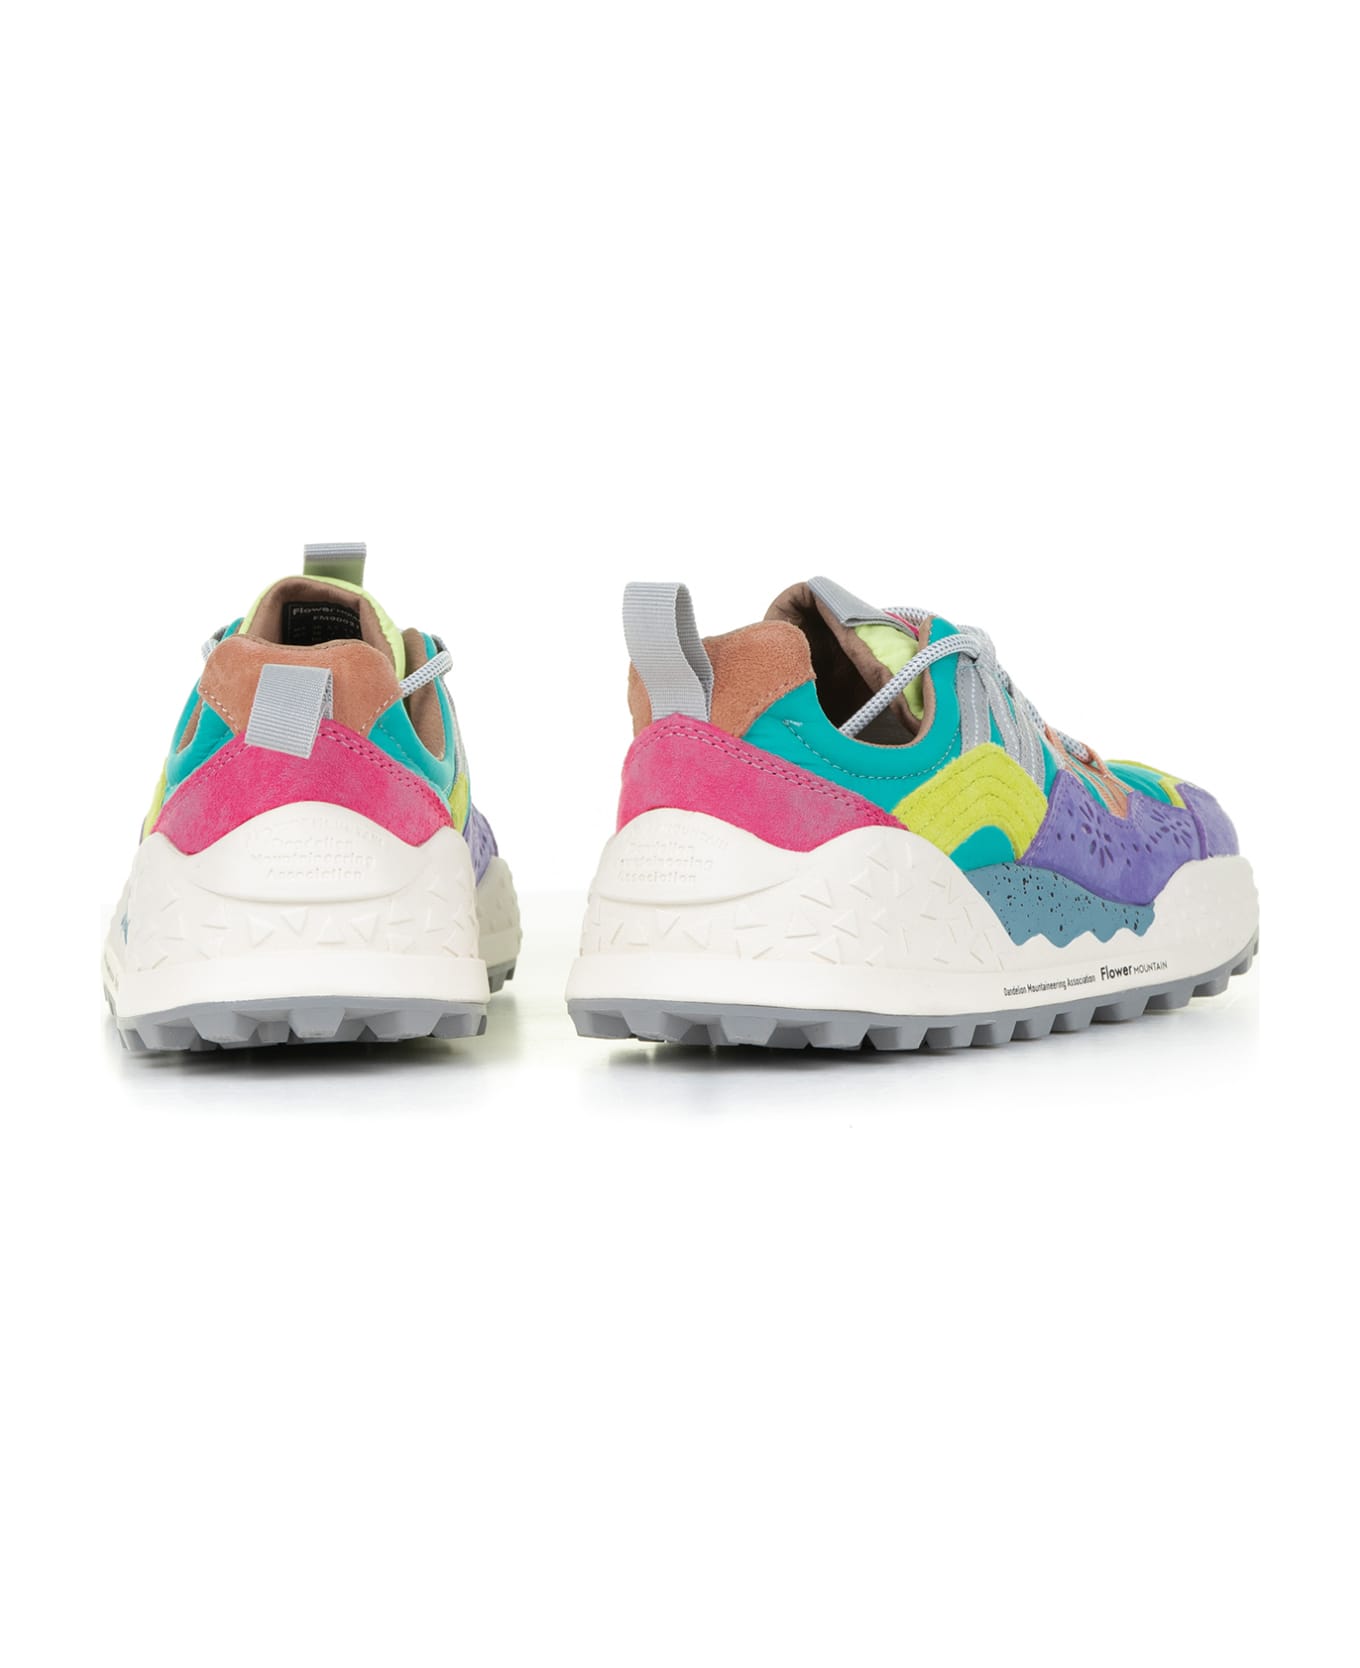 Flower Mountain Multicolored Washi Sneakers In Suede And Nylon - LILAC GREEN